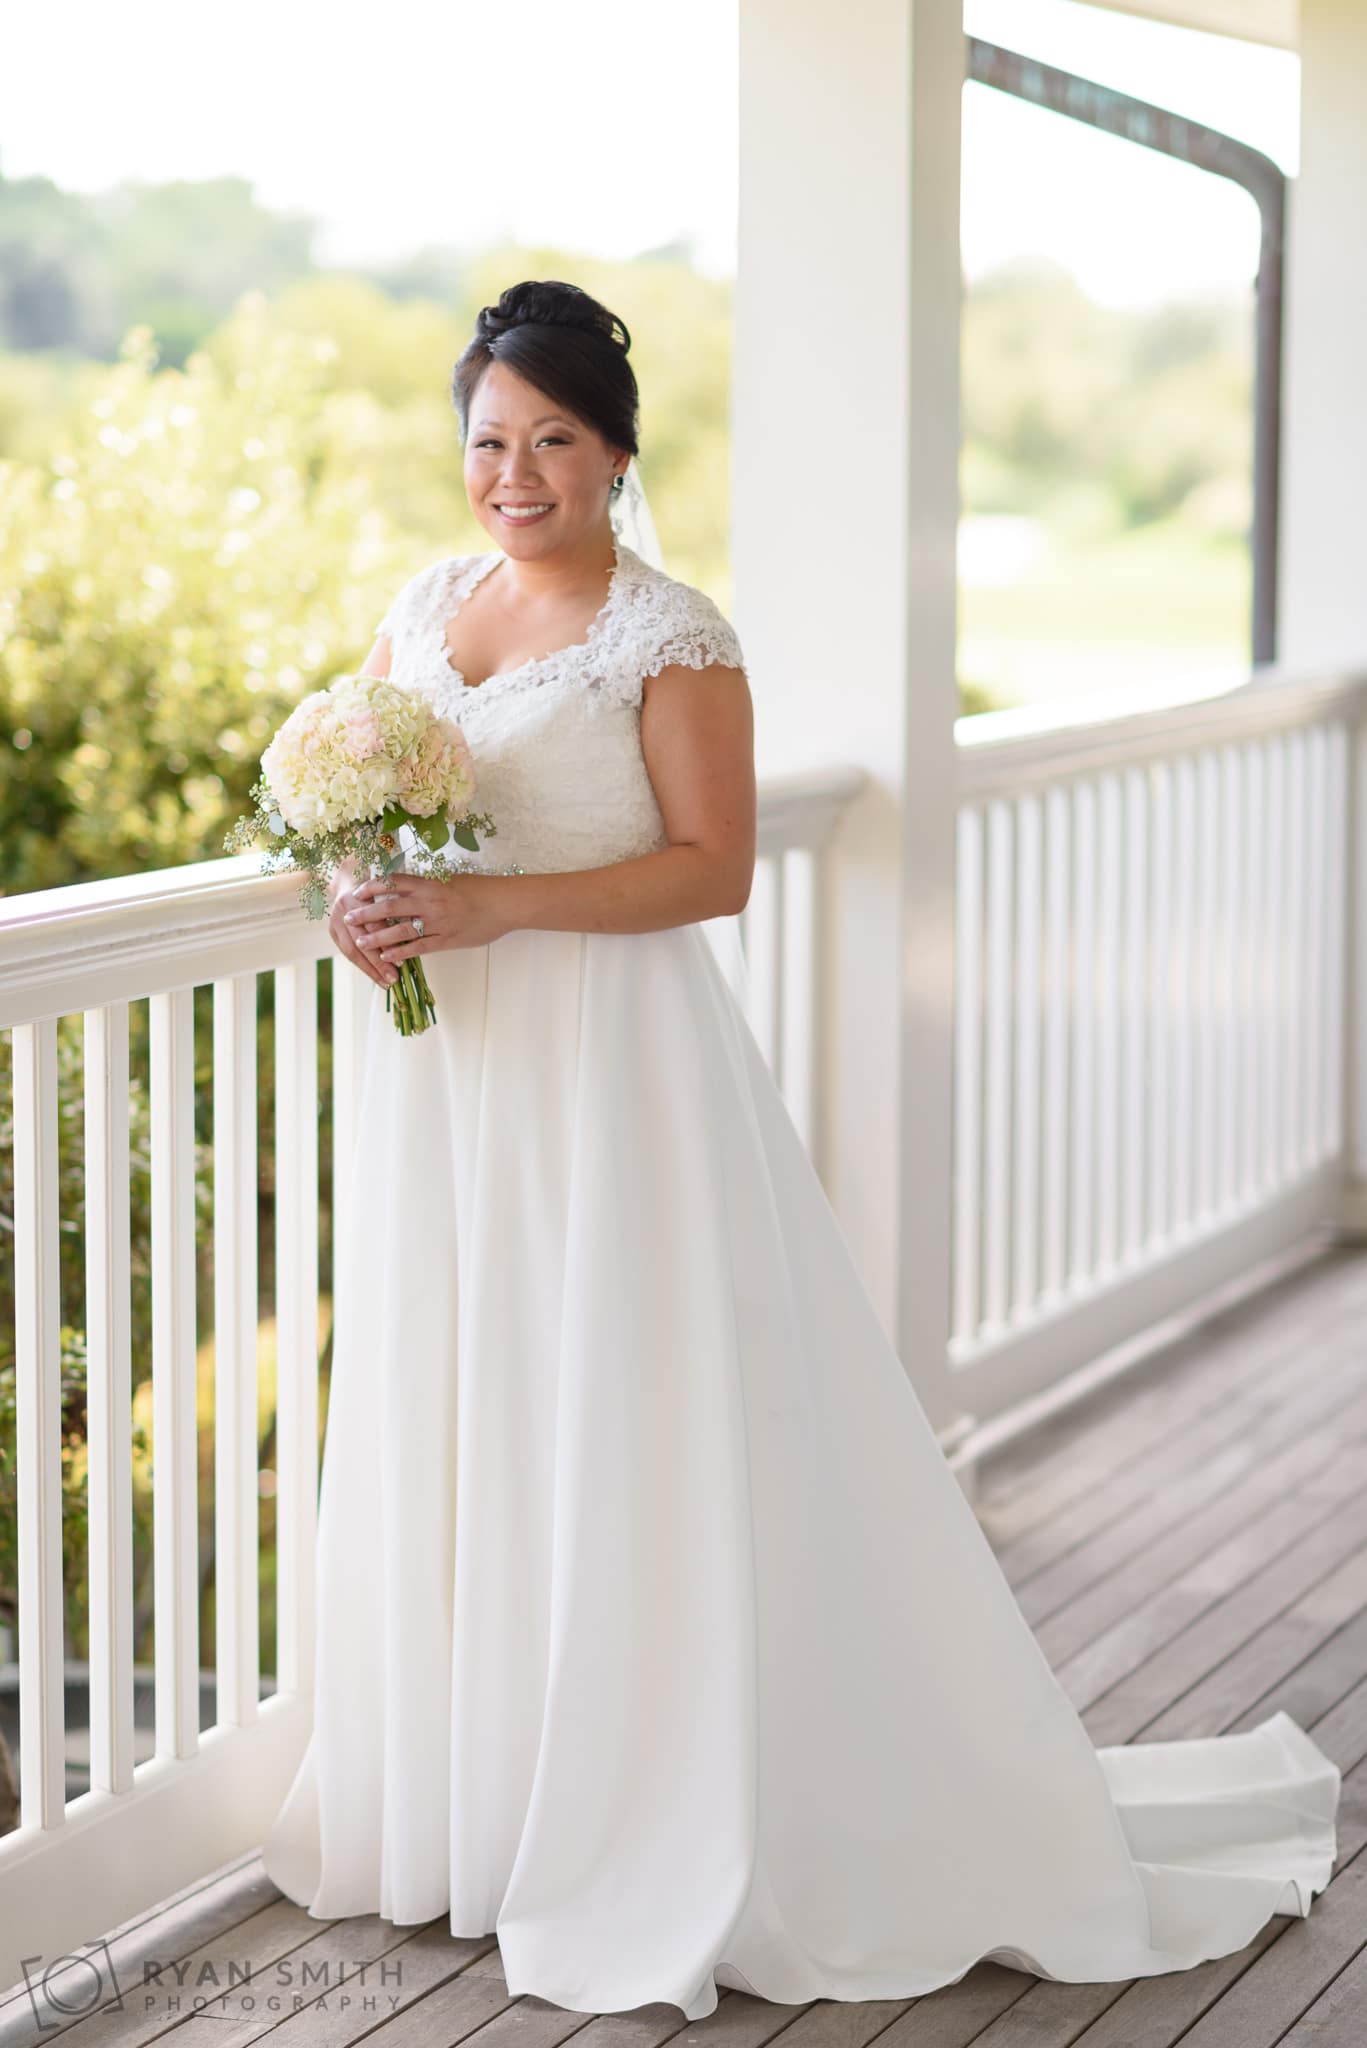 Bridal portraits before the ceremony - Dye Club at Barefoot Resort